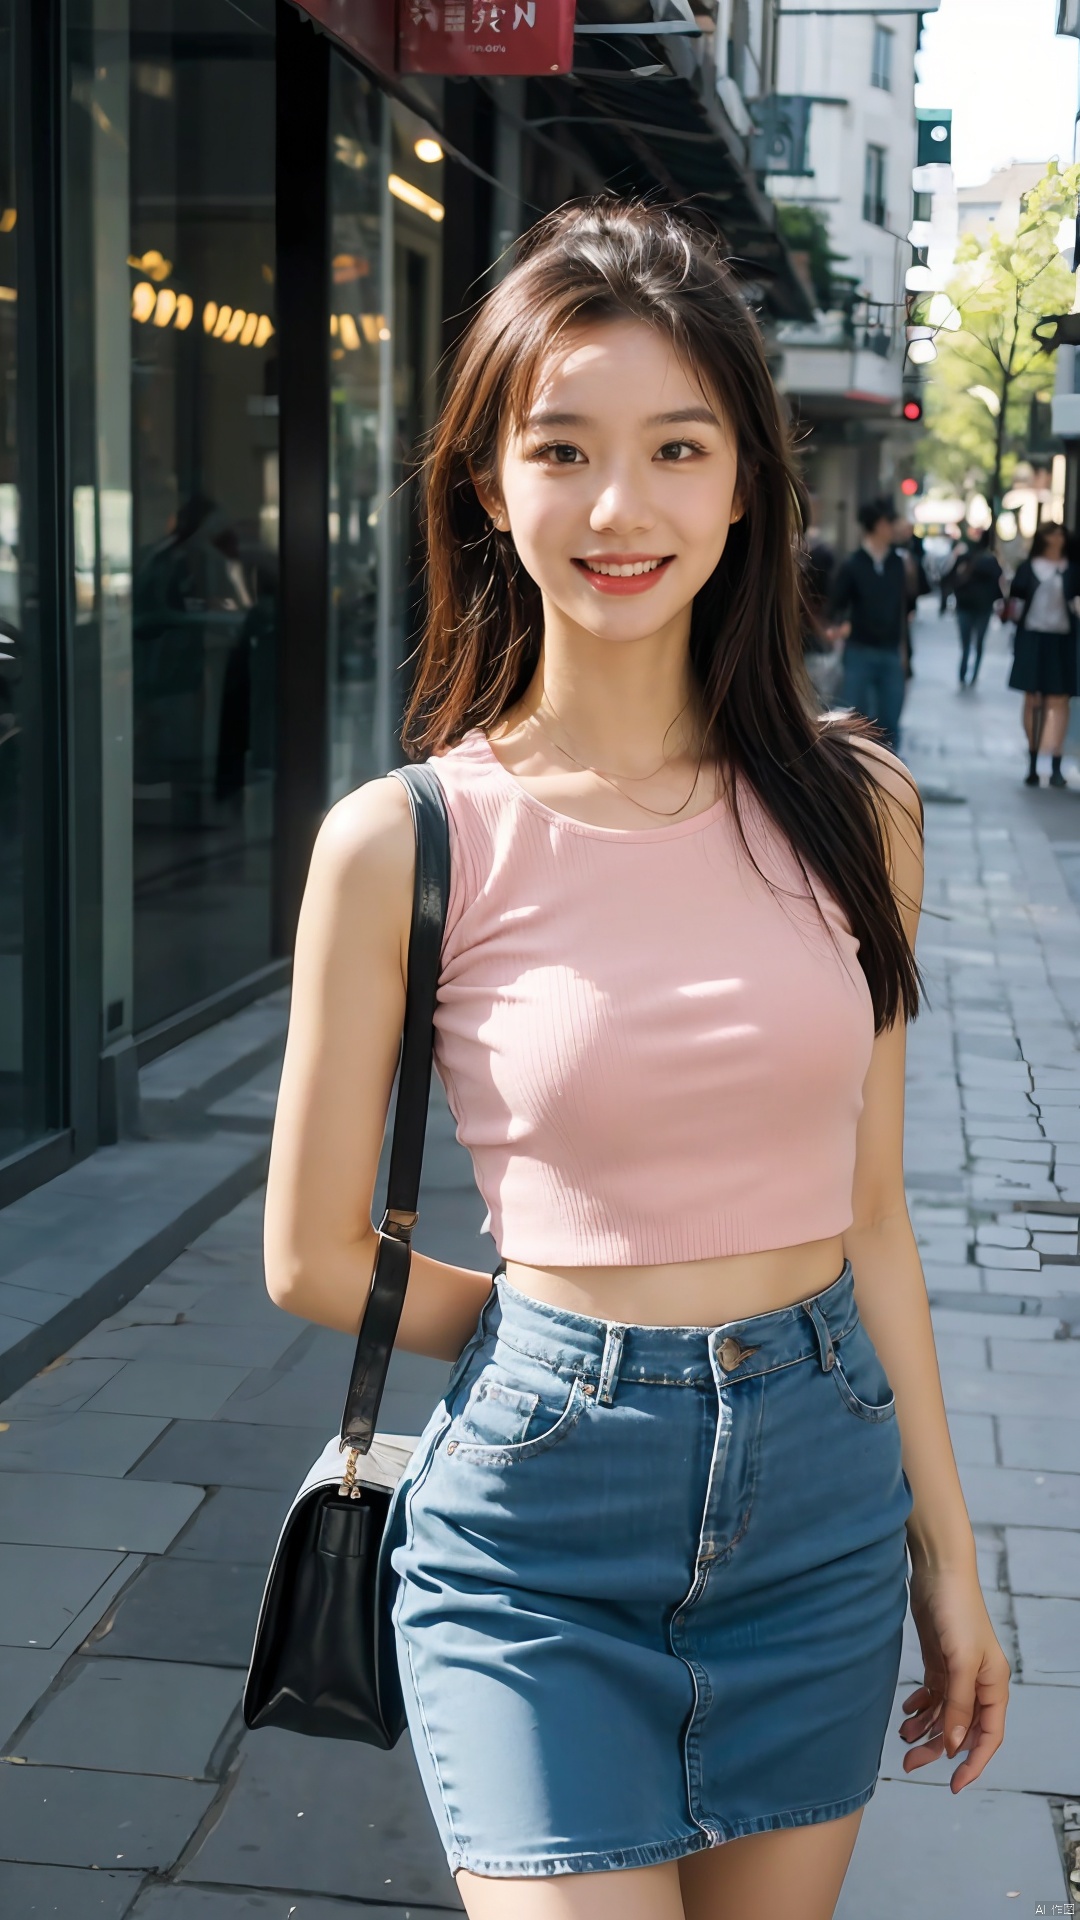  The image features a young woman in a pink top and a blue skirt, standing on a cobbled street with a smile on her face. The sunlight illuminates her face, casting a warm glow on her features. The colors in the image are vibrant and well-balanced, with a natural feel to them. The quality of the image is excellent, with no visible noise or graininess. The street setting adds a sense of depth and context to the scene. The young woman's cheerful and confident demeanor is captured in the image.